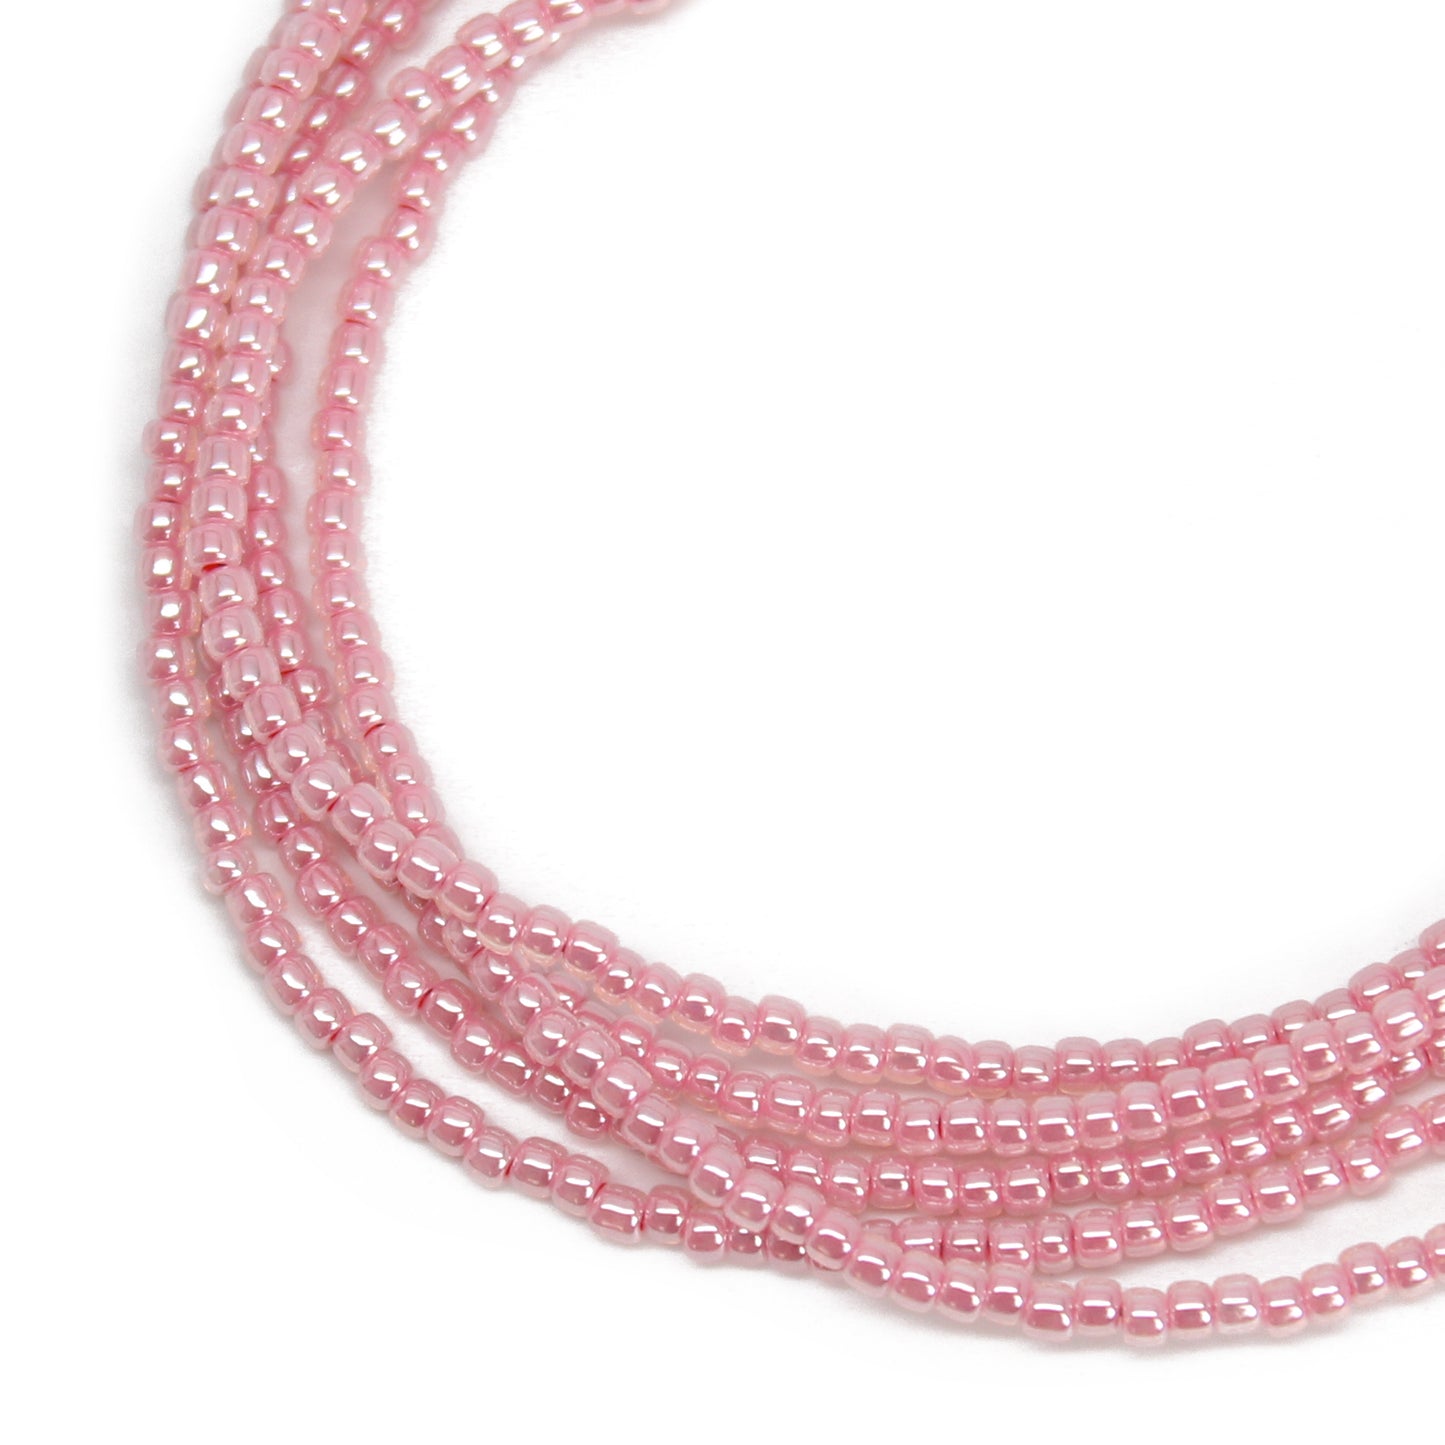 Impatiens Pink Seed Bead Necklace, Thin 1.5mm Single Strand – Kathy Bankston